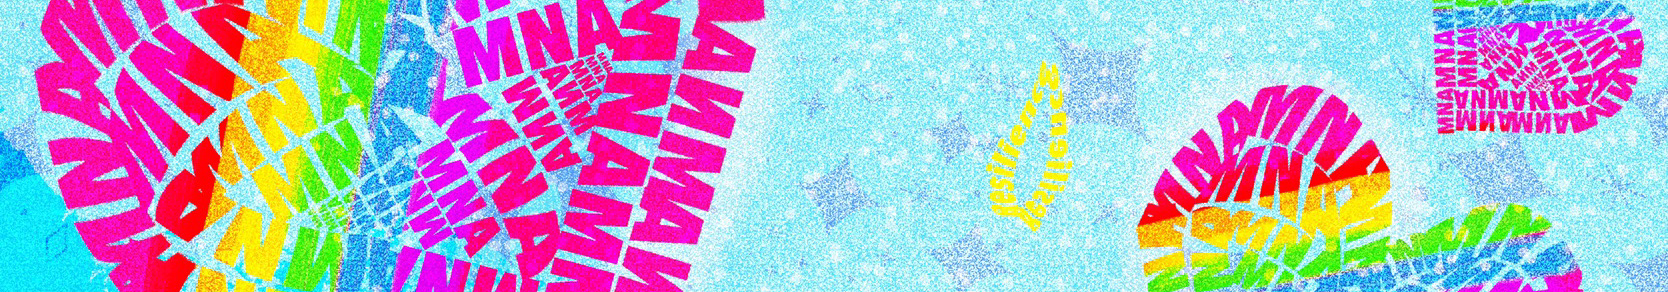 M N A's profile banner